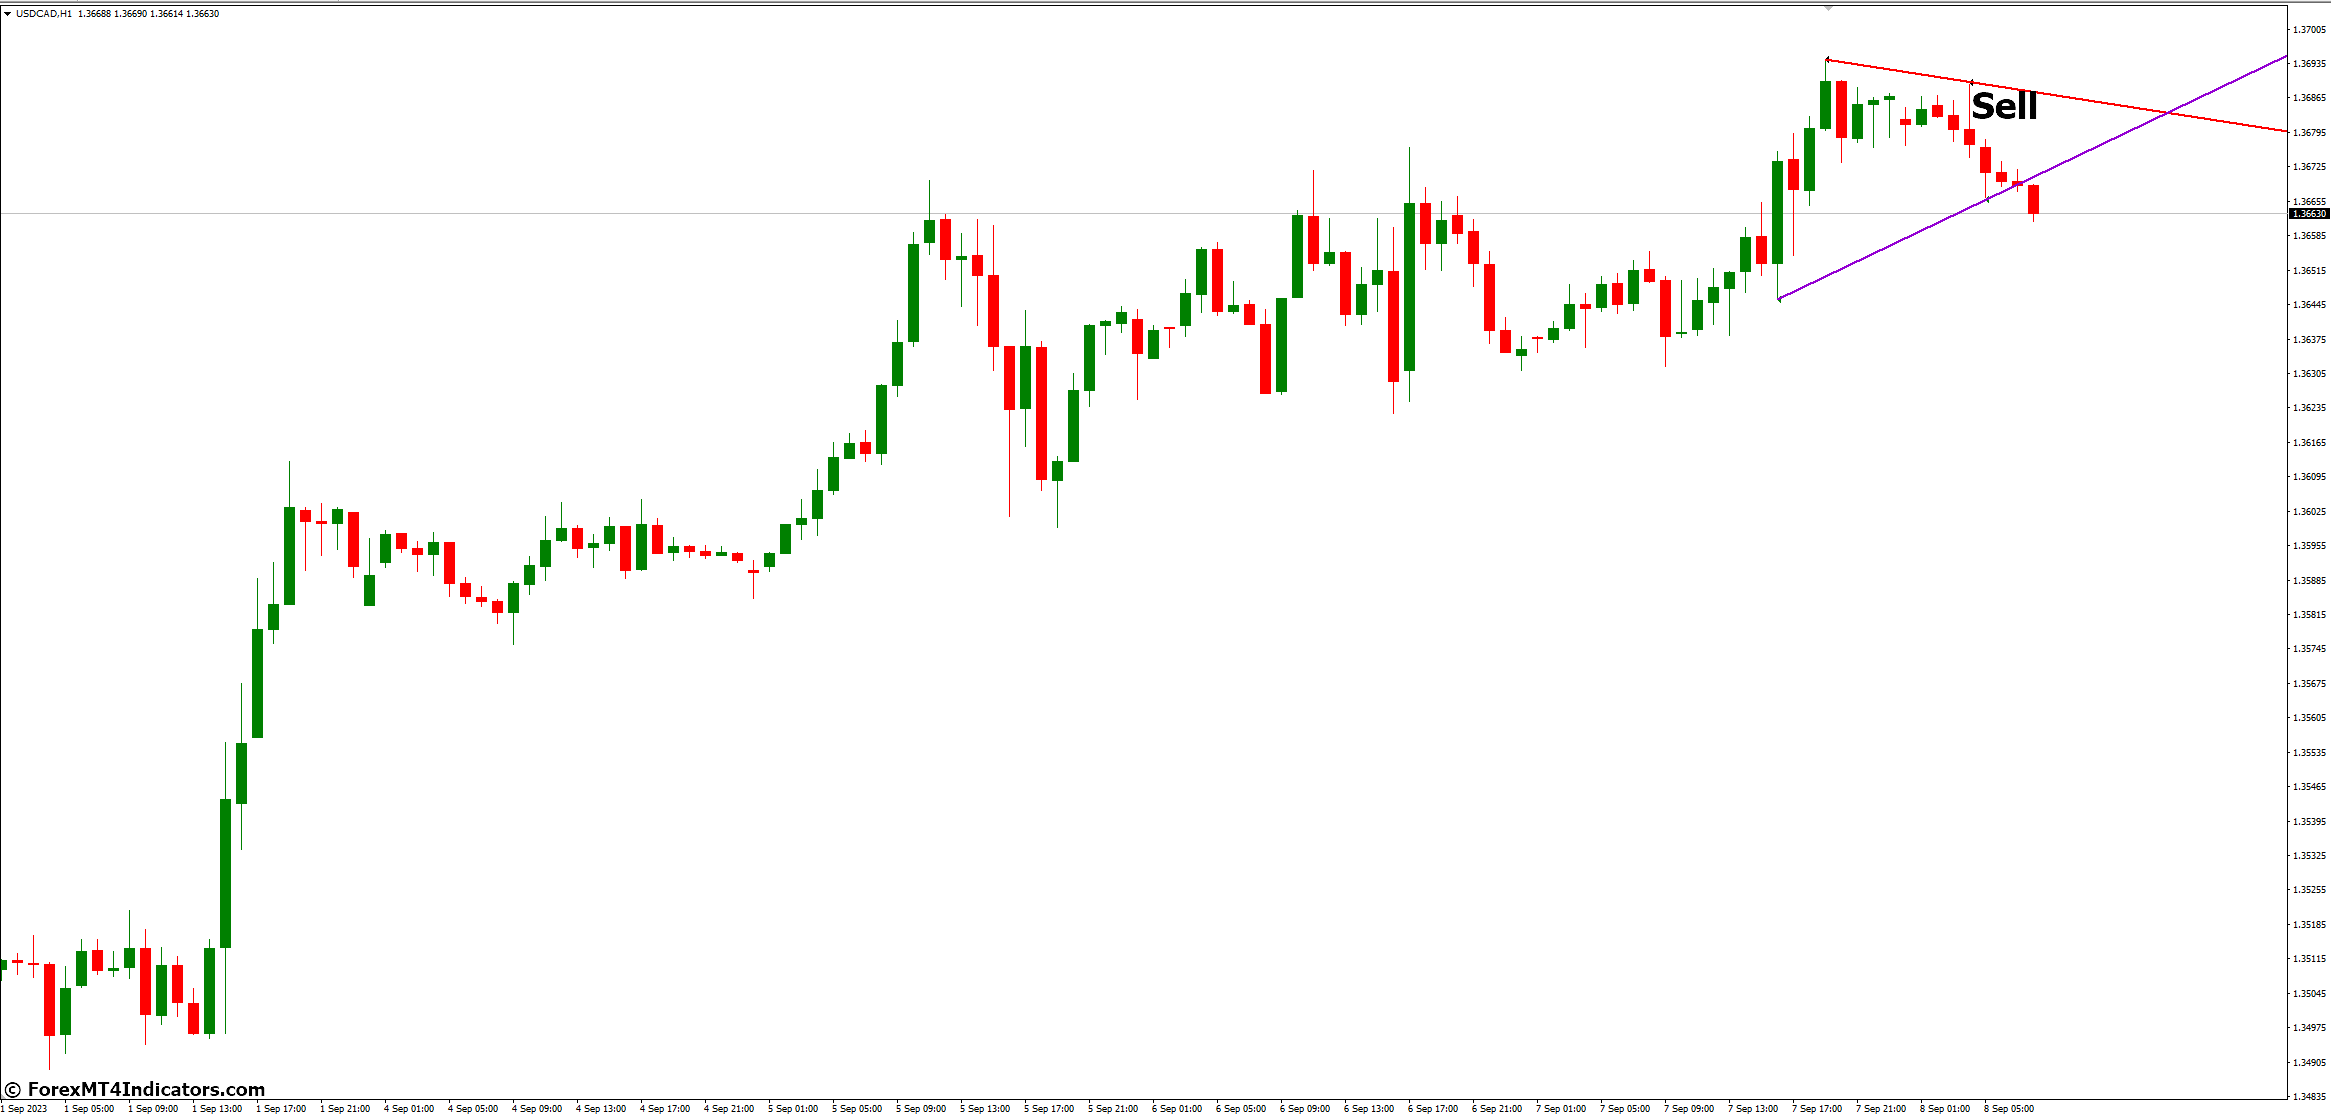 How to Trade with Multi Time Frame Breakout MT4 Indicator - Sell Entry